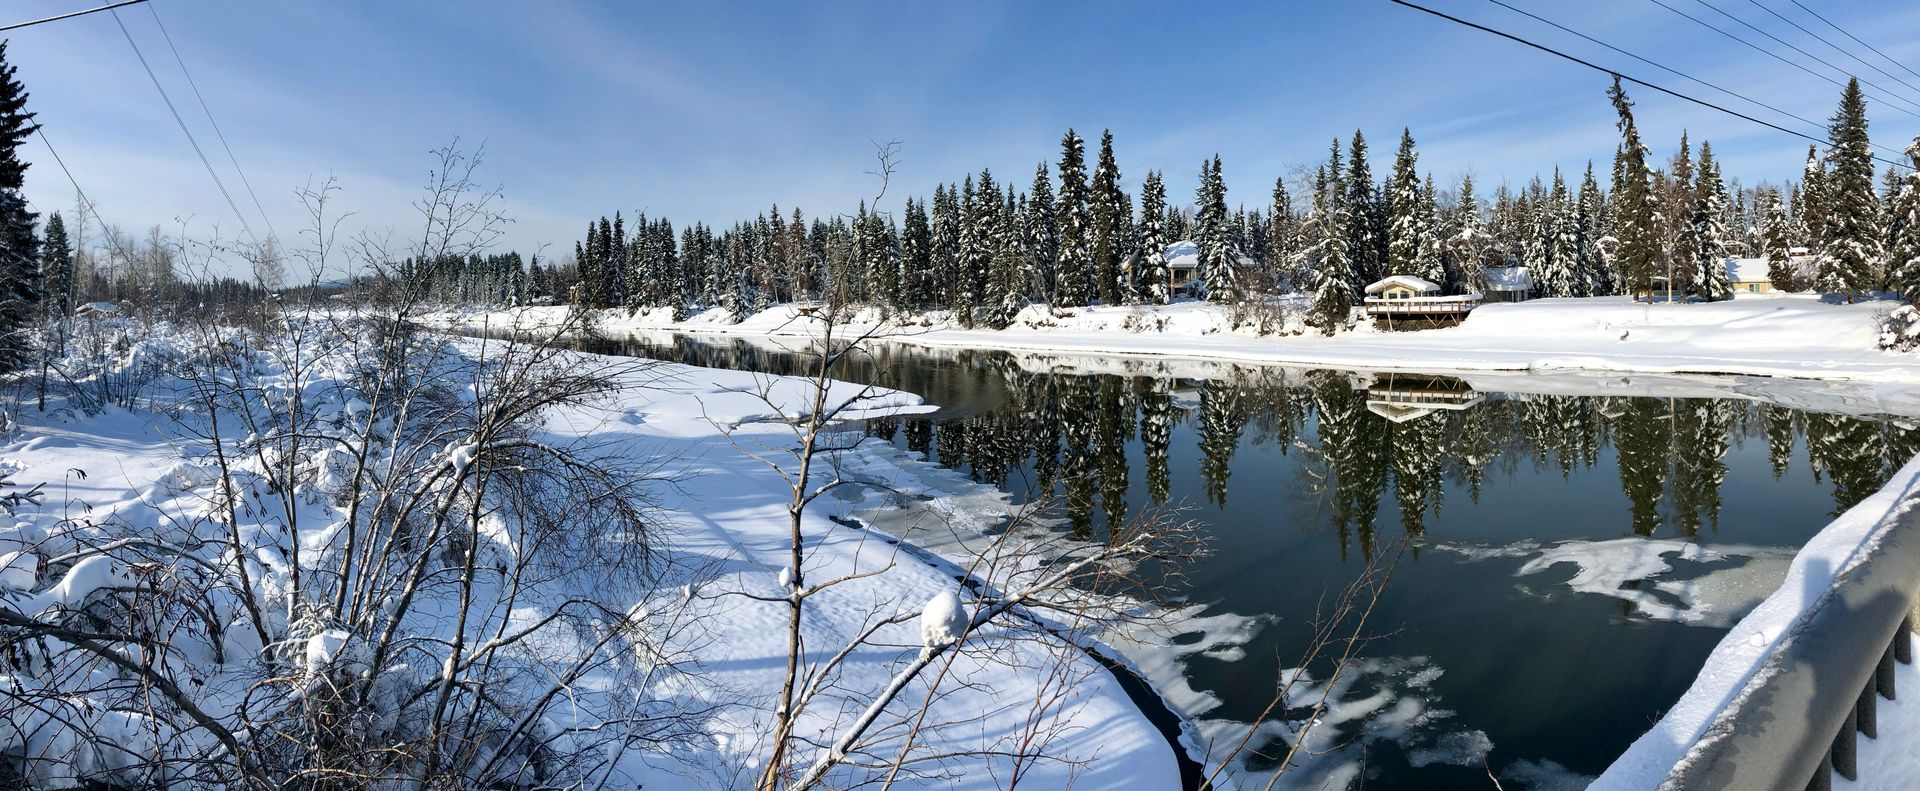 Chena River - the only river which is not frozen